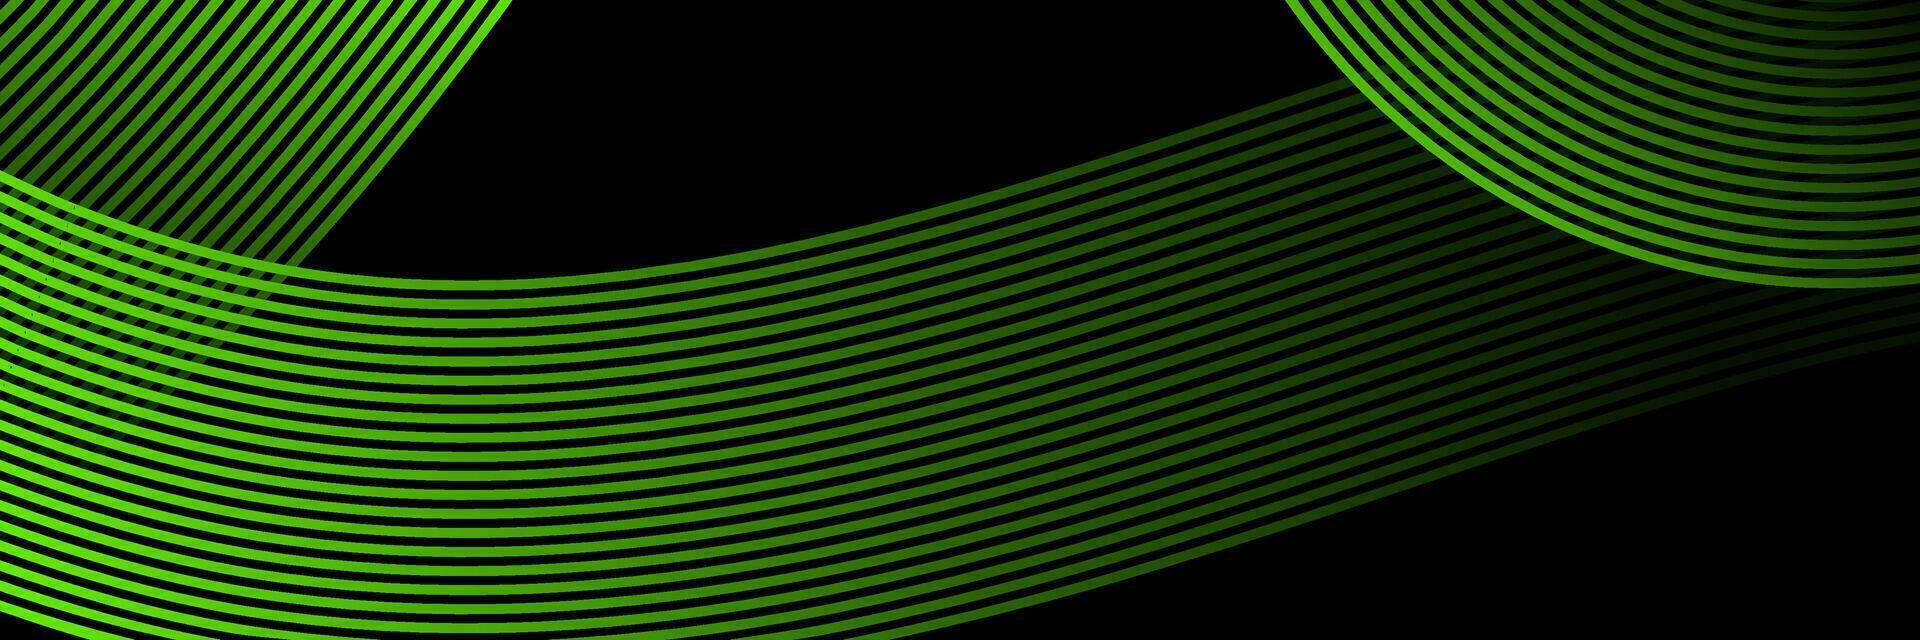 abstract elegant green background with glowing lines vector